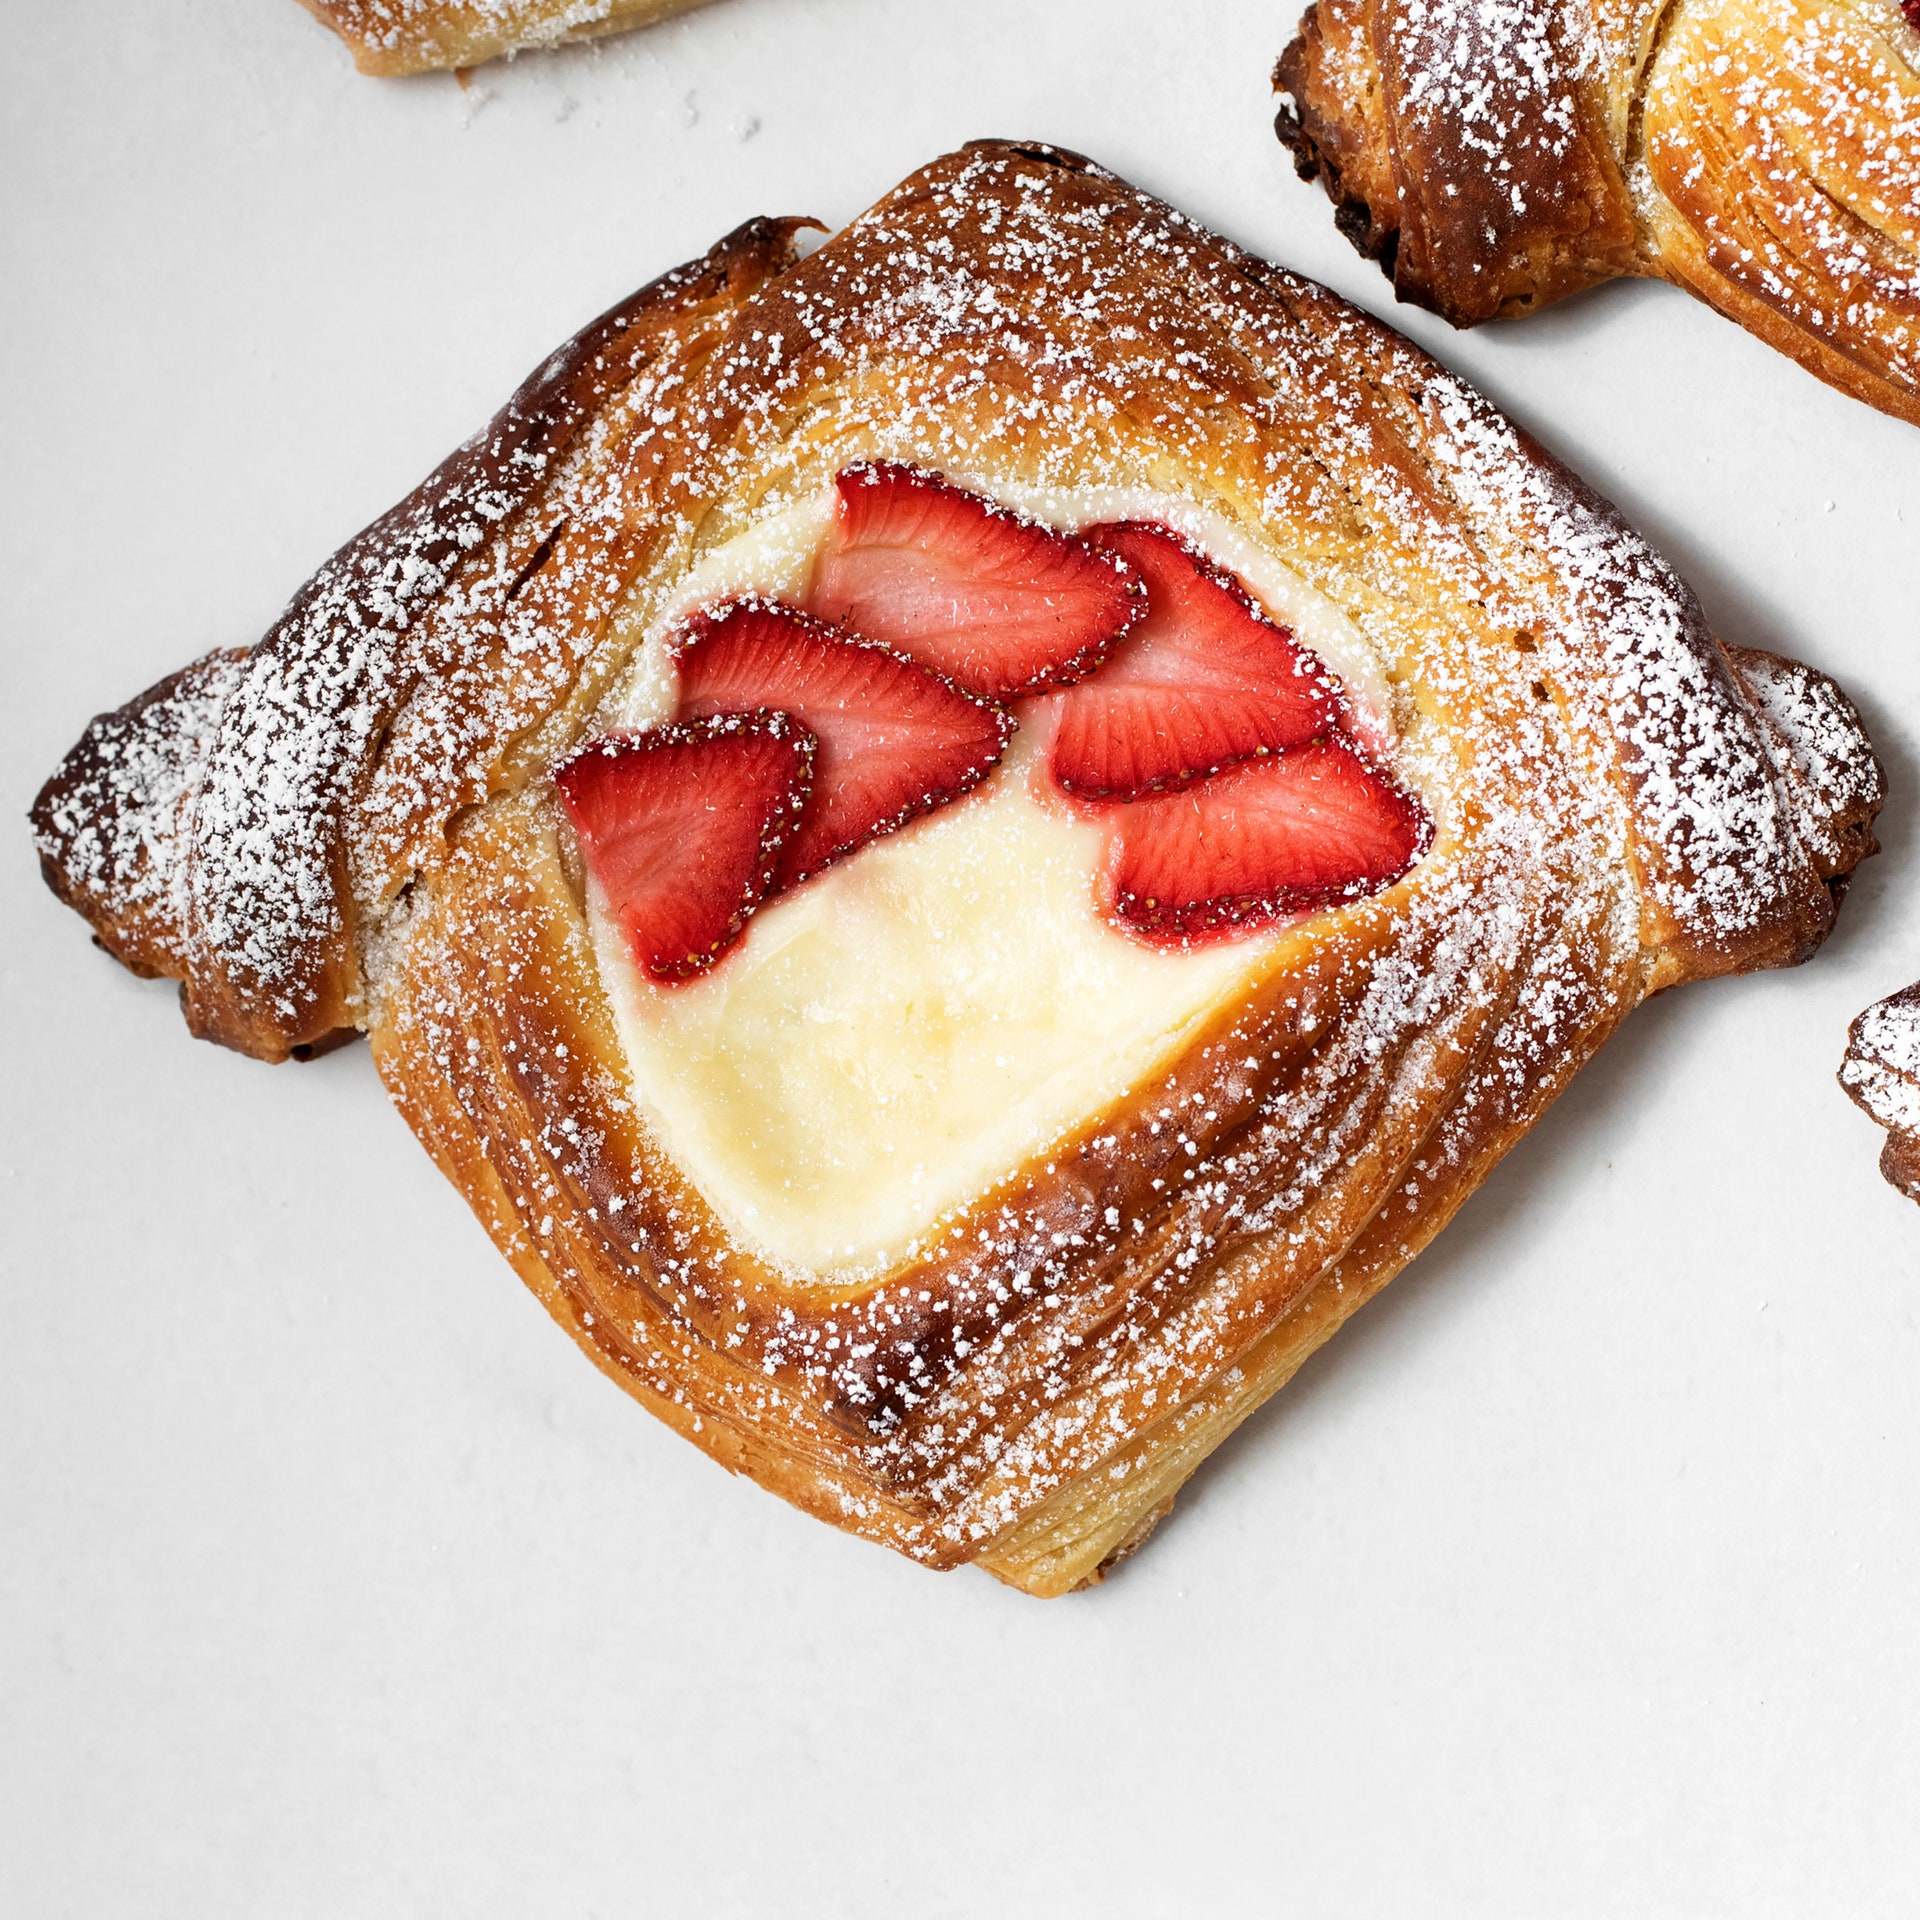 A danish filled with cream and sliced strawberries.